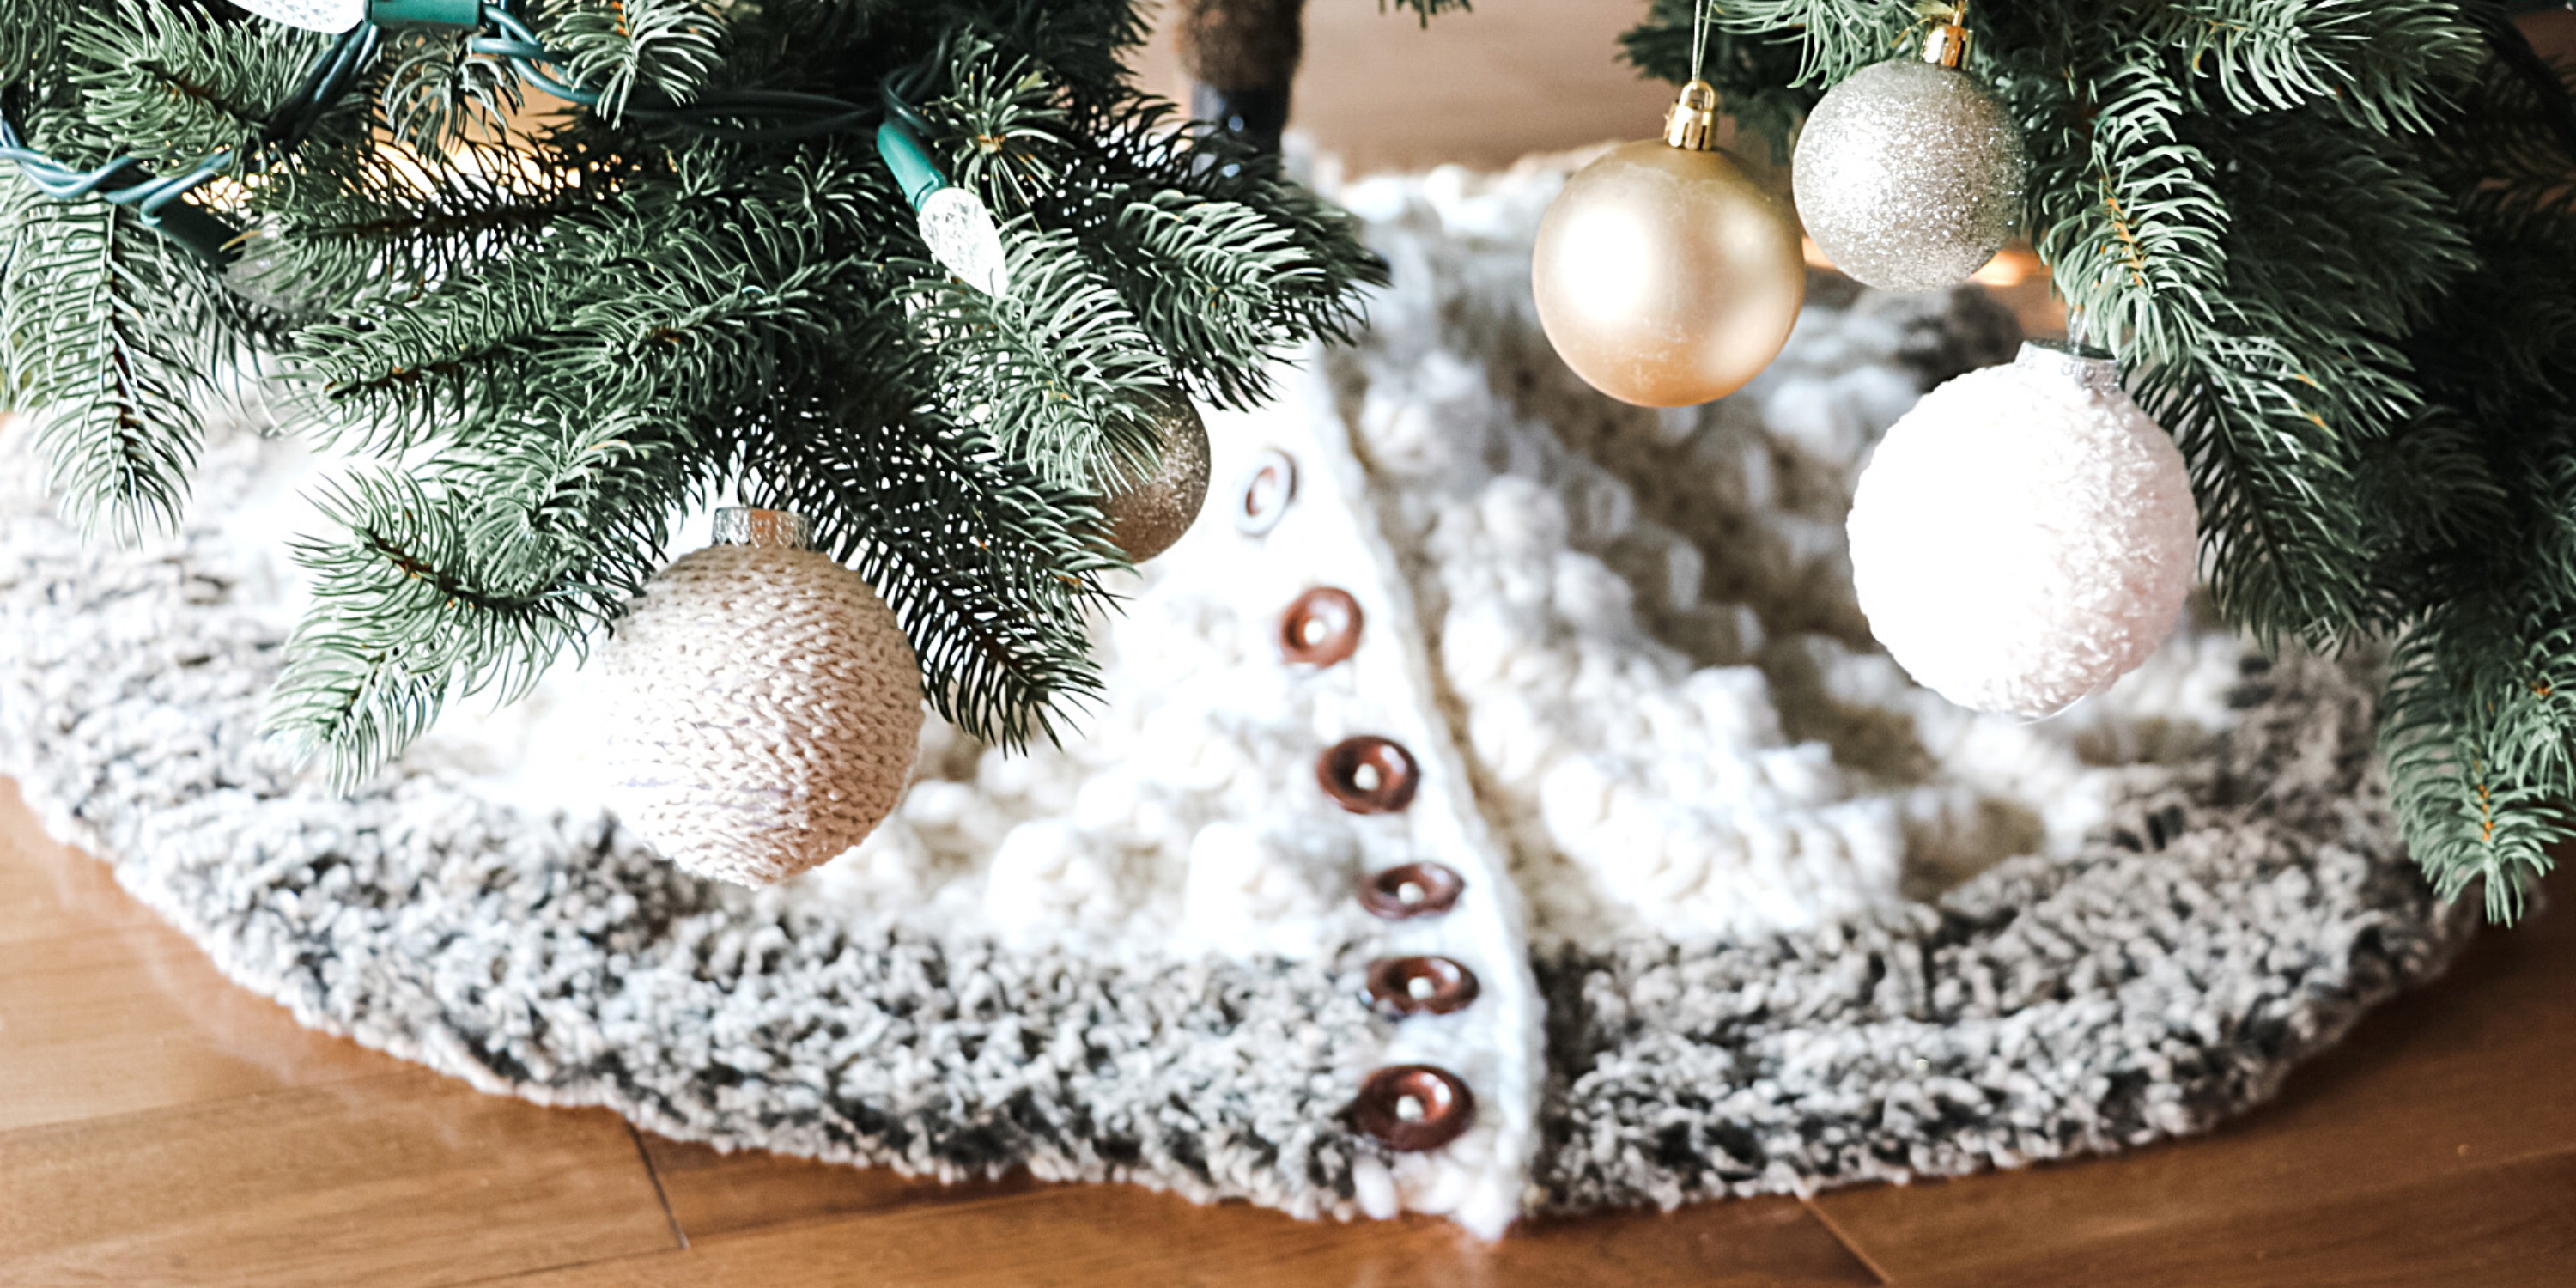 Crochet Finds - Christmas Tree Skirts To Crochet -